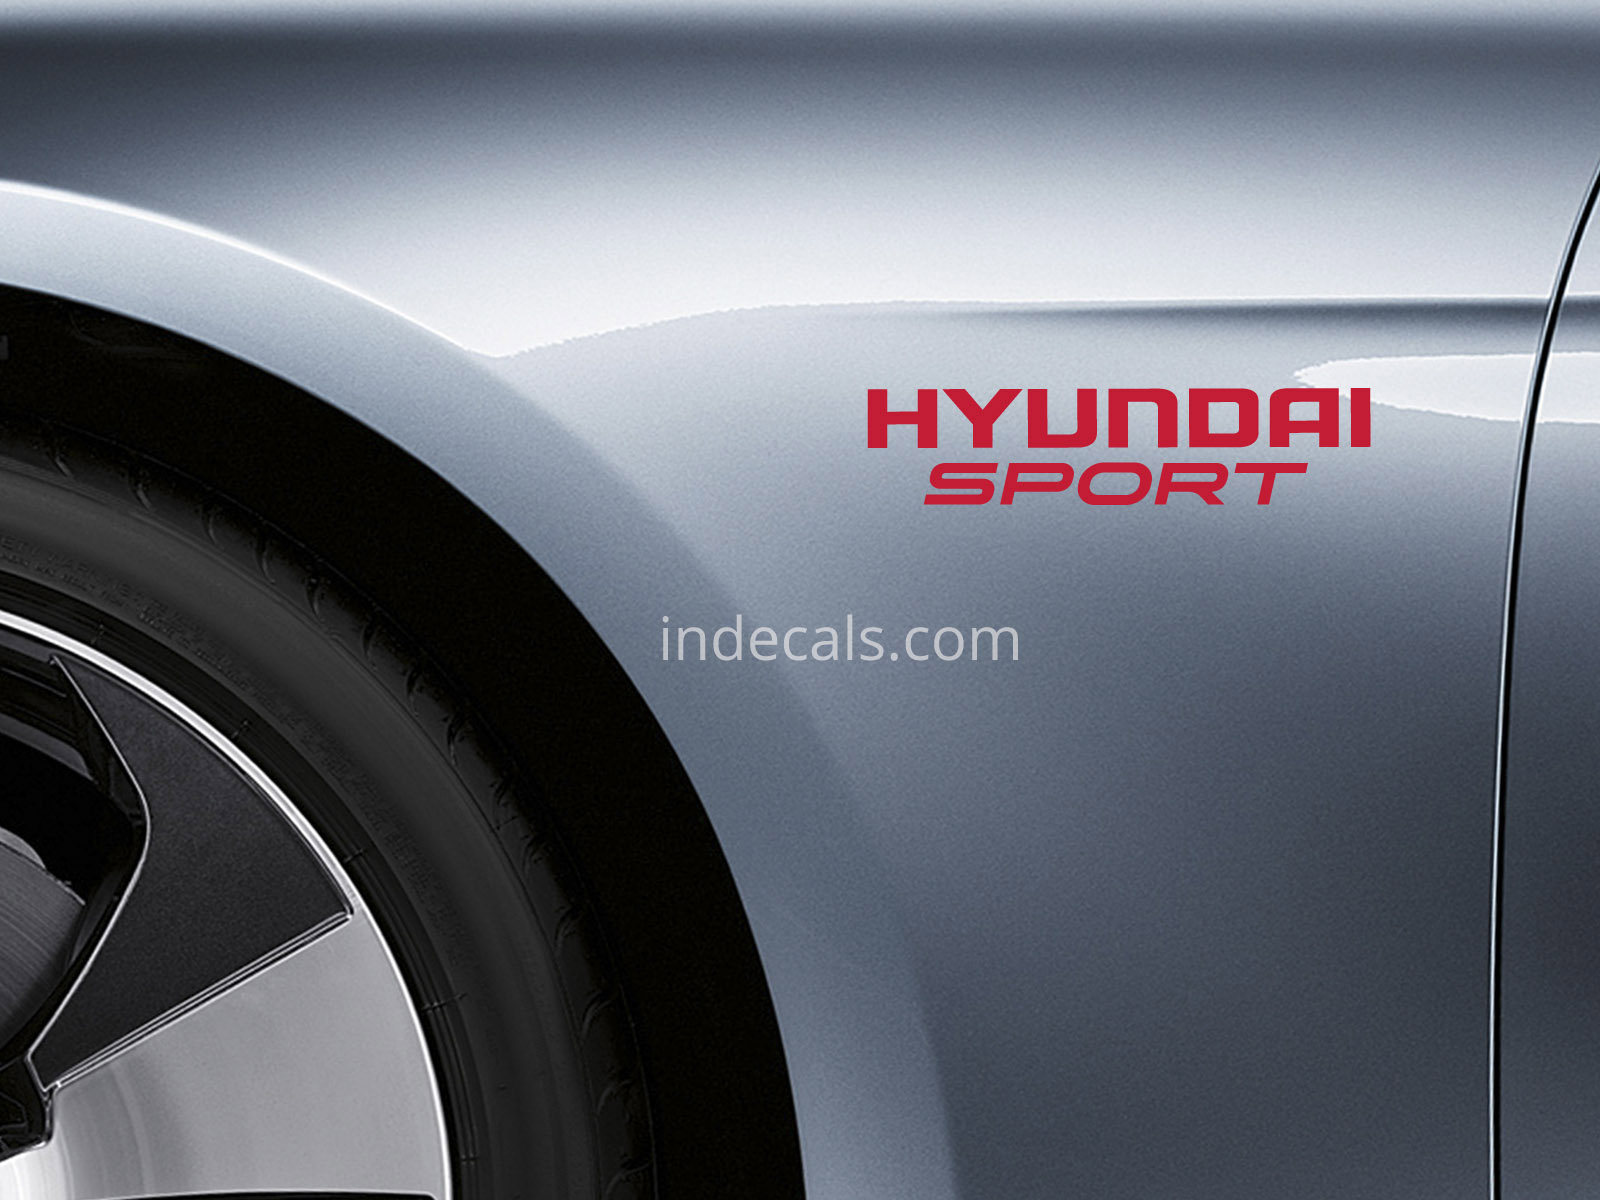 2 x Hyundai Sports stickers for Wings - Red